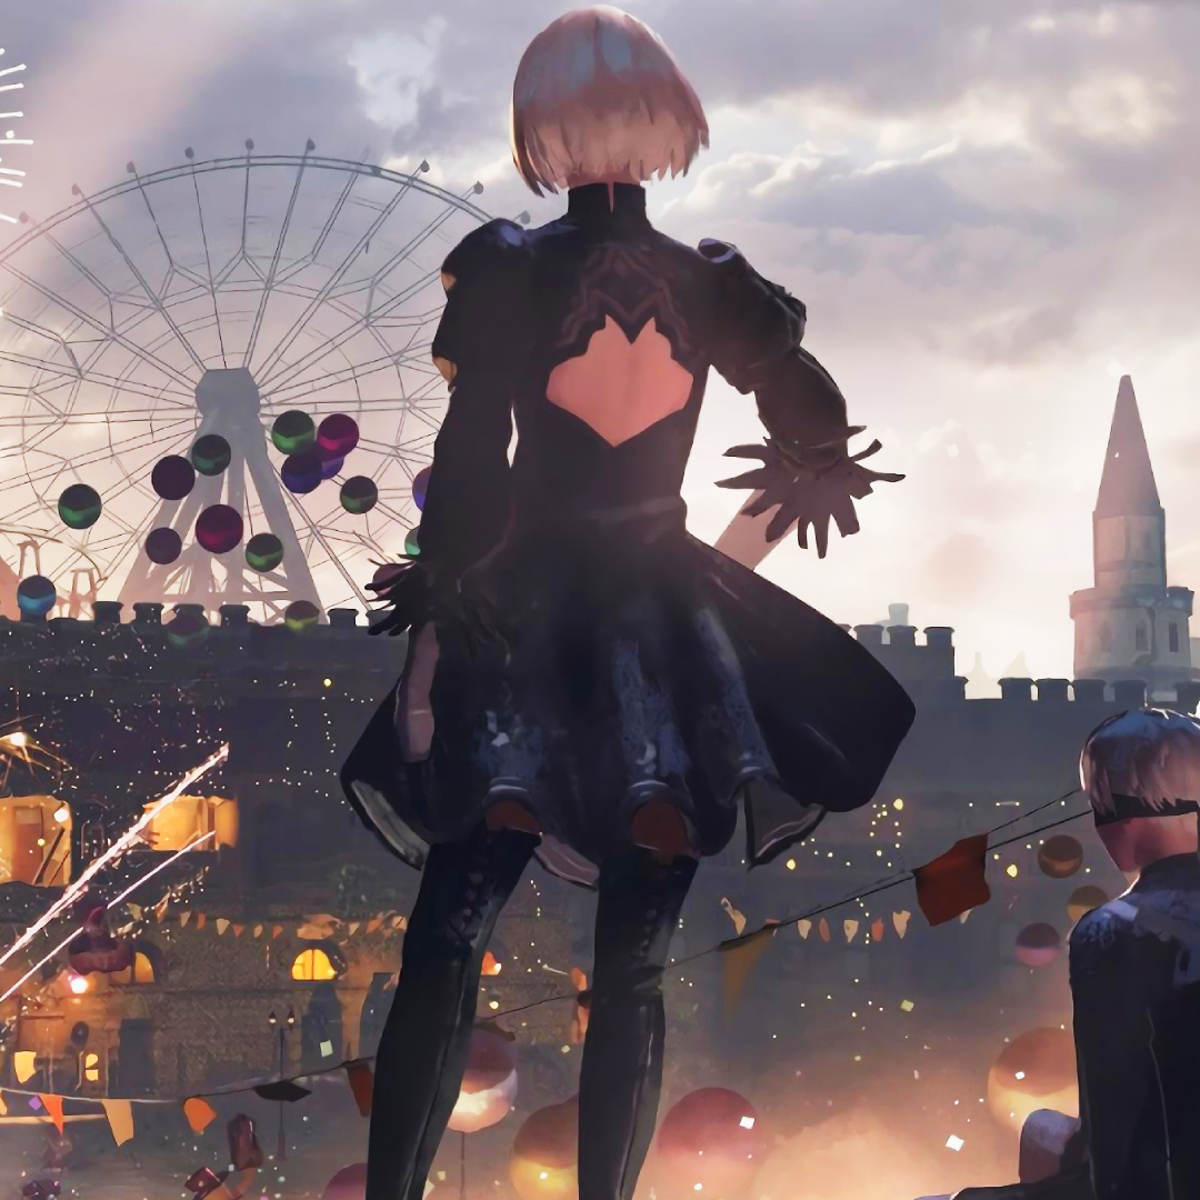 NieR: Automata's performance on Nintendo Switch exceeded my expectations